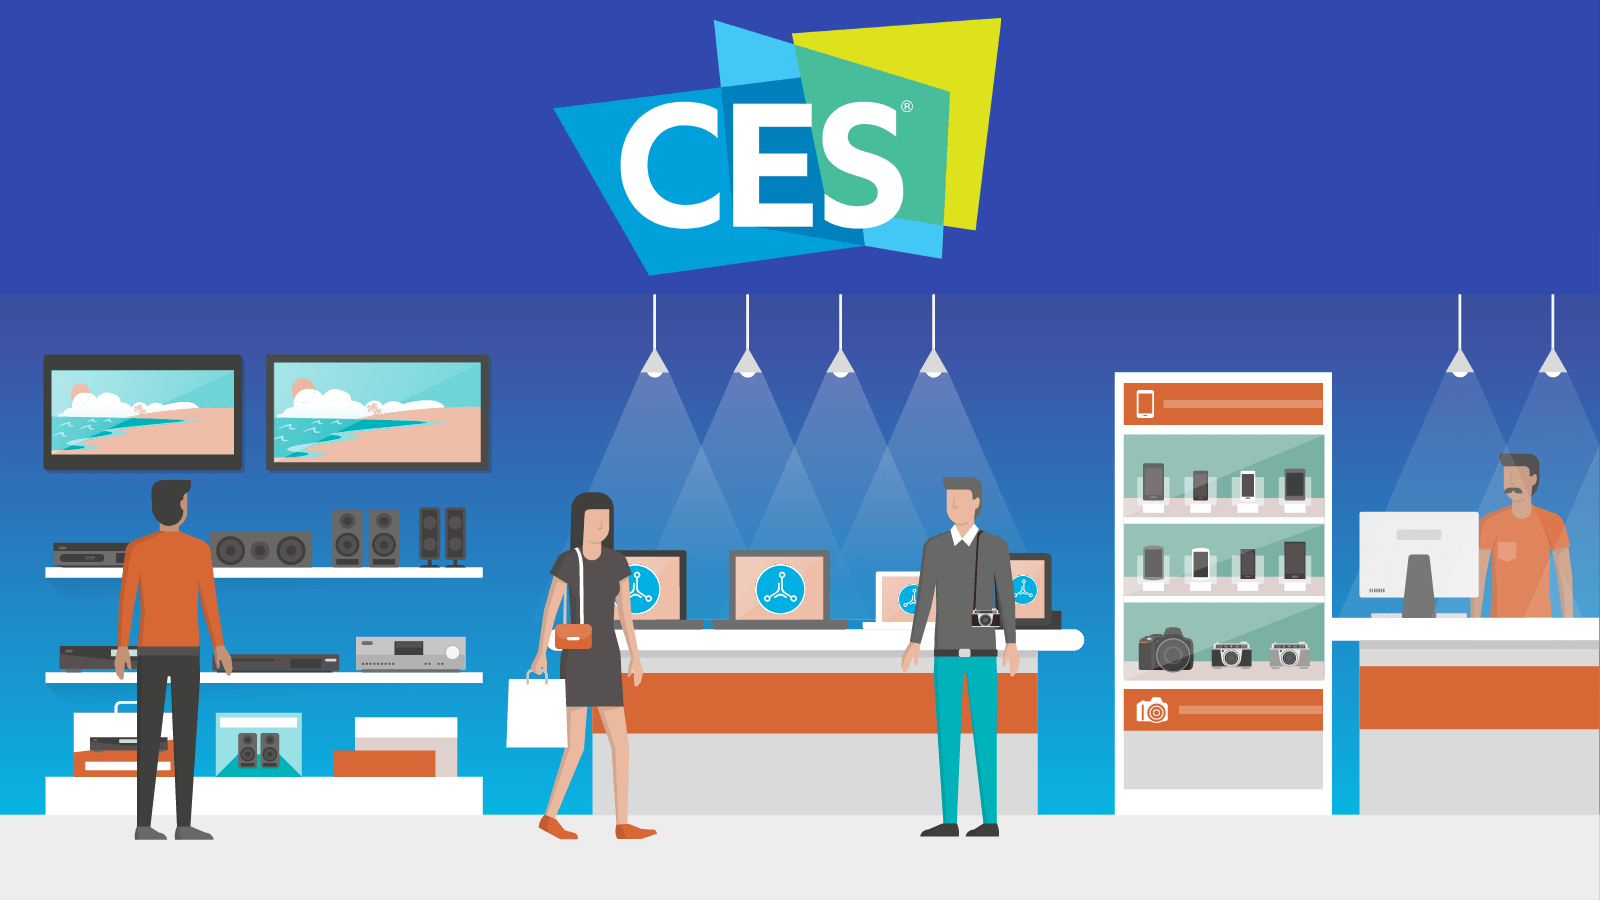 Serve Will Be at CES 2019!